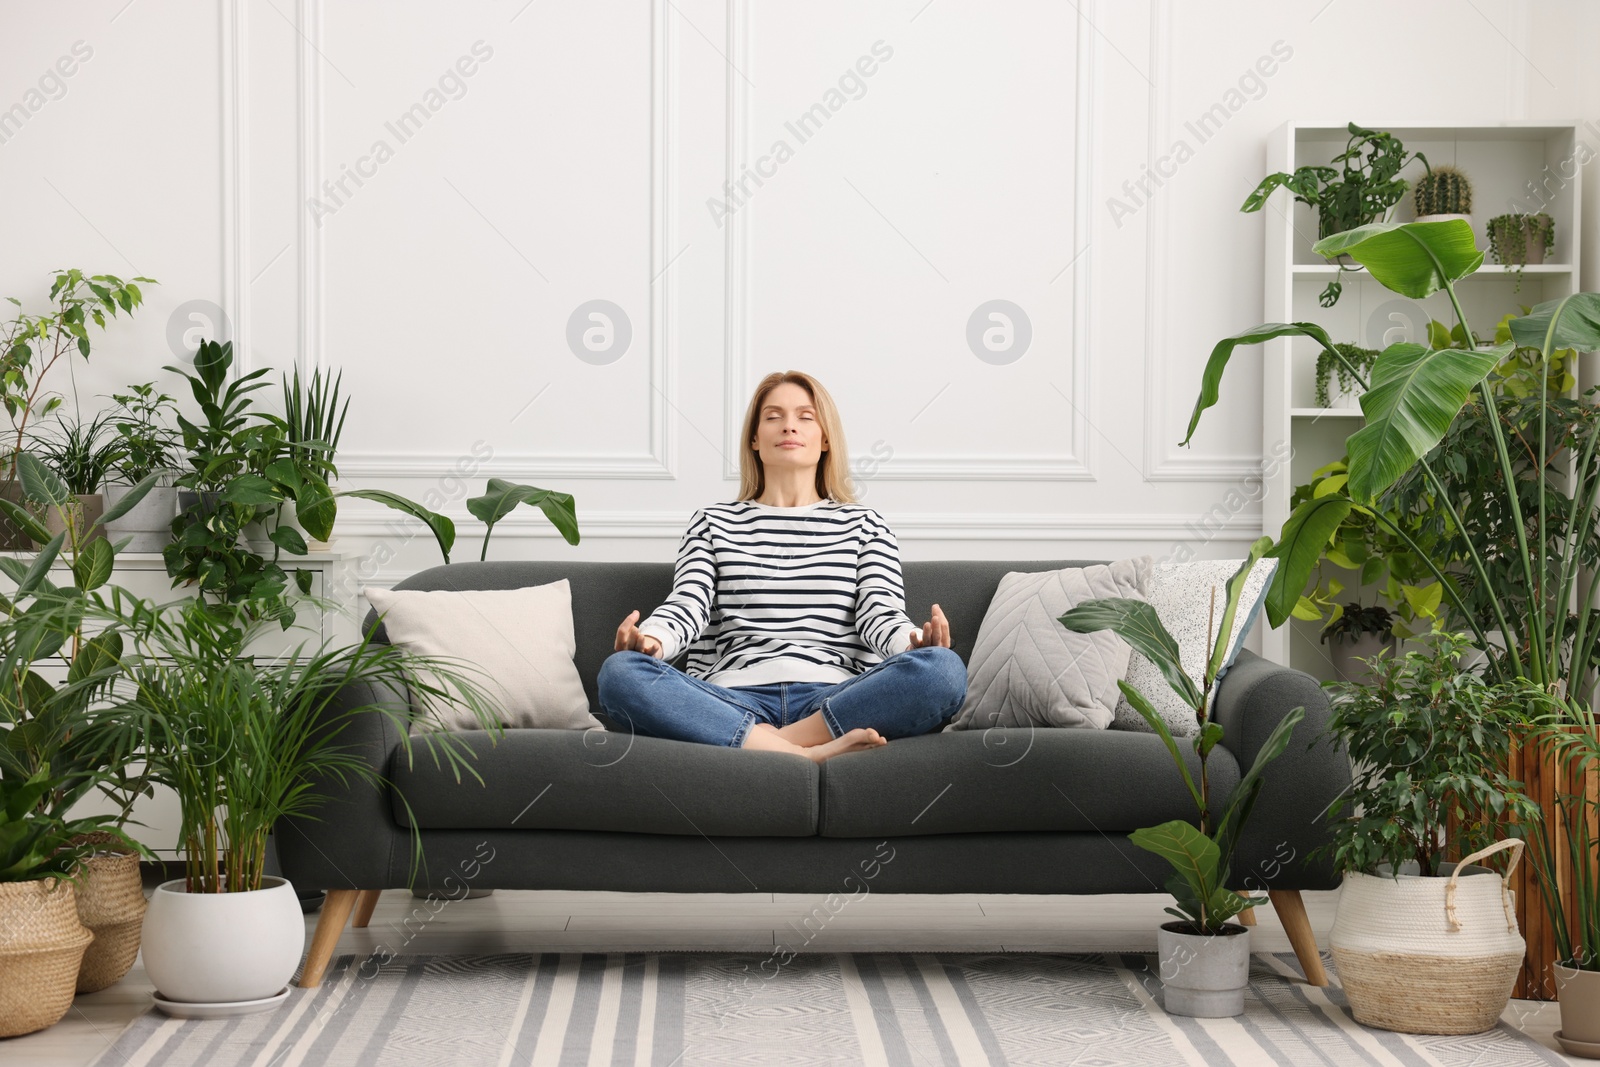 Photo of Woman meditating on sofa surrounded by beautiful potted houseplants at home